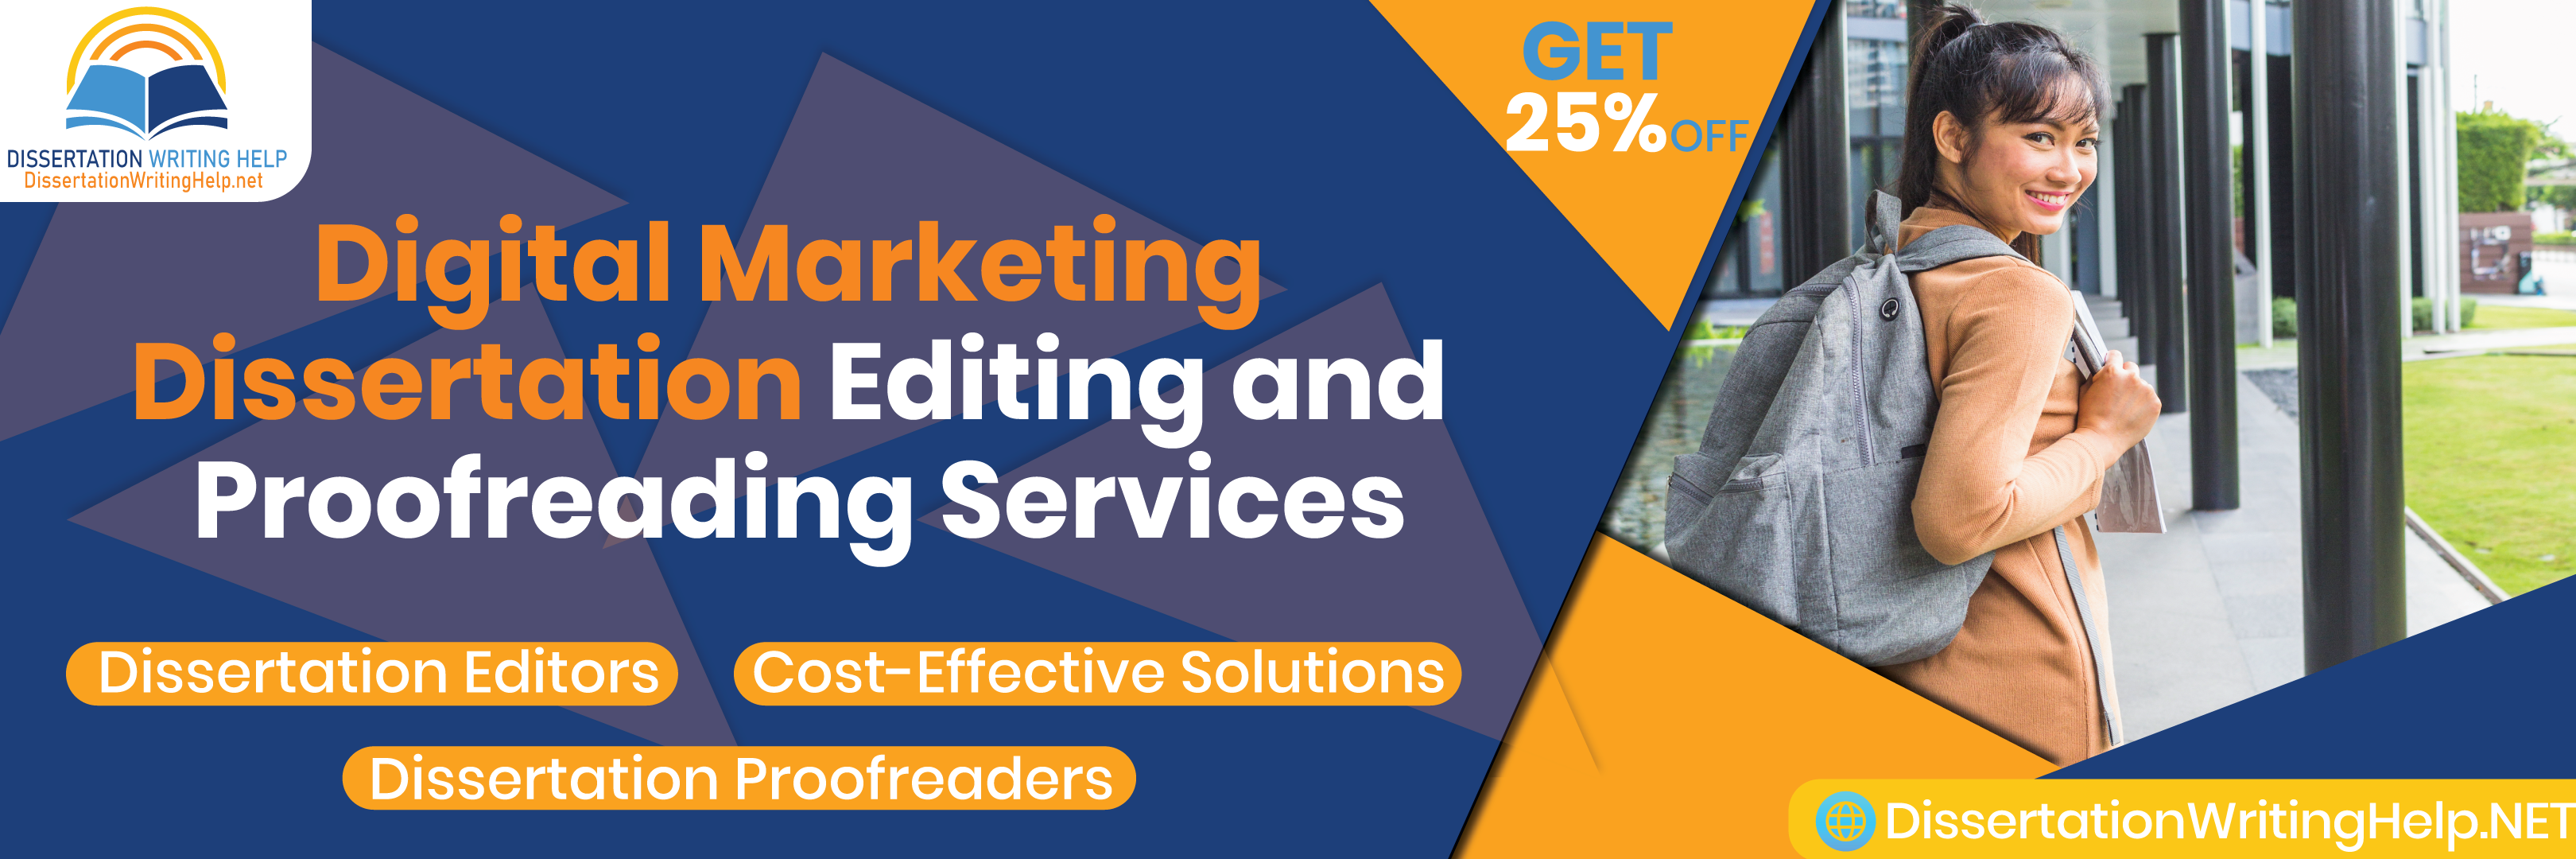 Digital Marketing Dissertation Editing and Proofreading Services